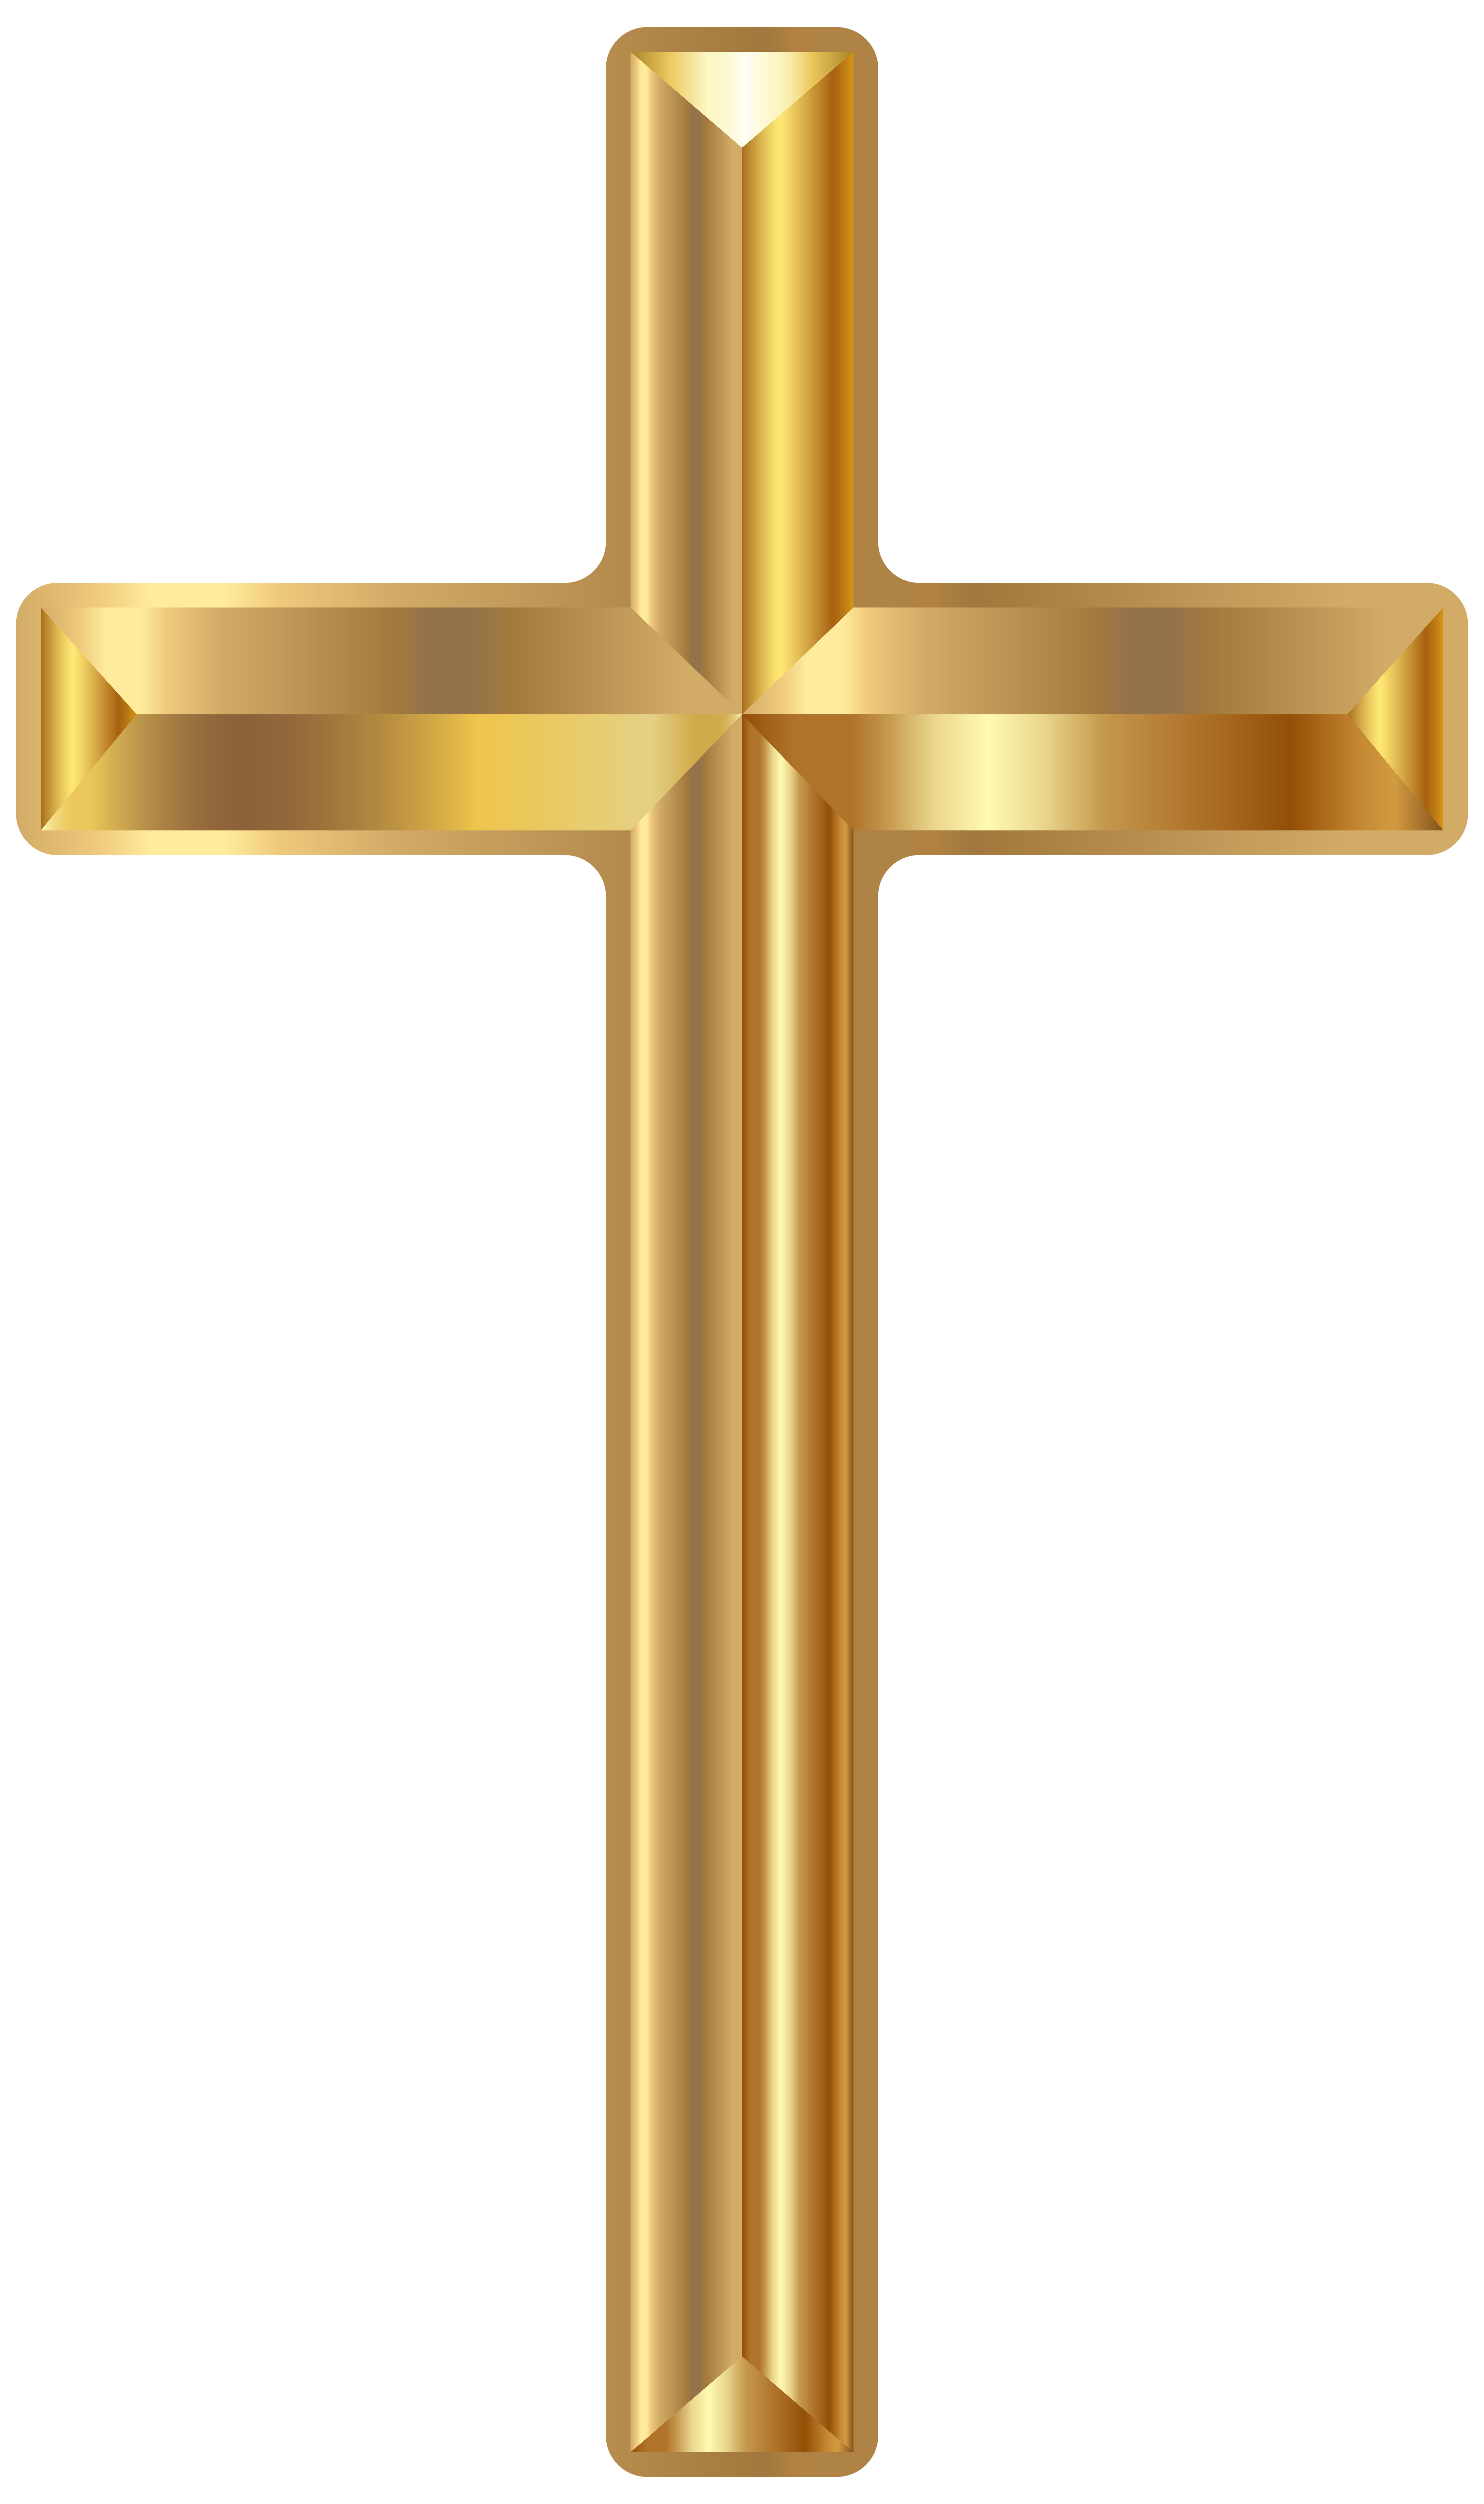 Golden Crosses Clipart Clipground